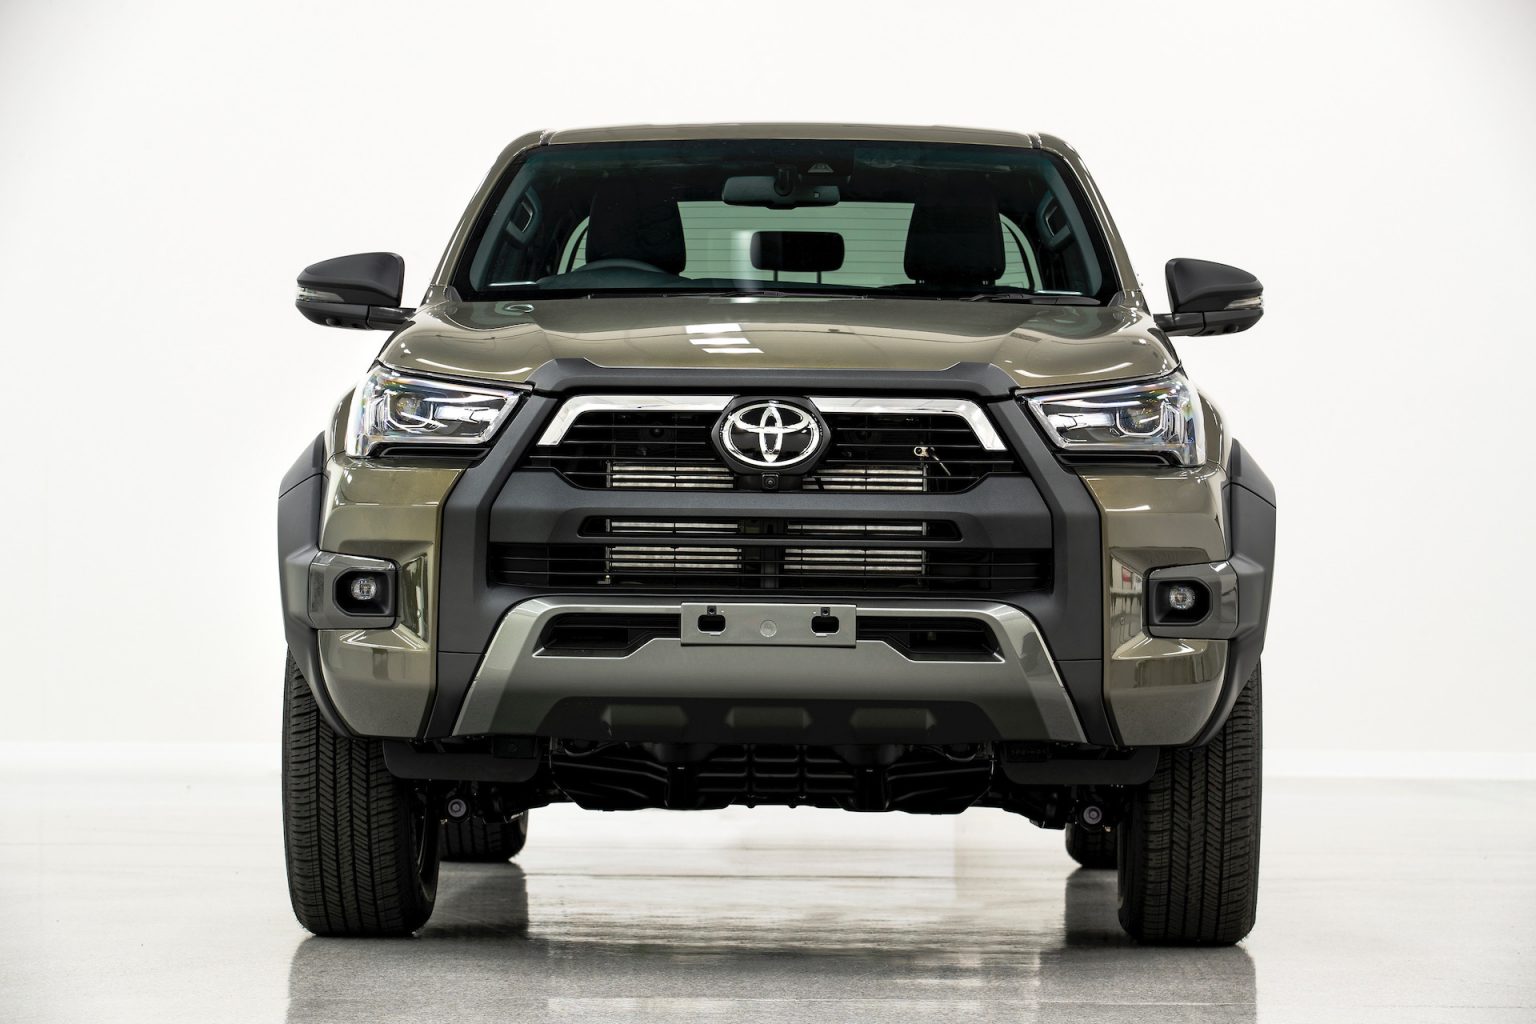 2023 Toyota HiLux Rouge arrives in October, priced from 70,200